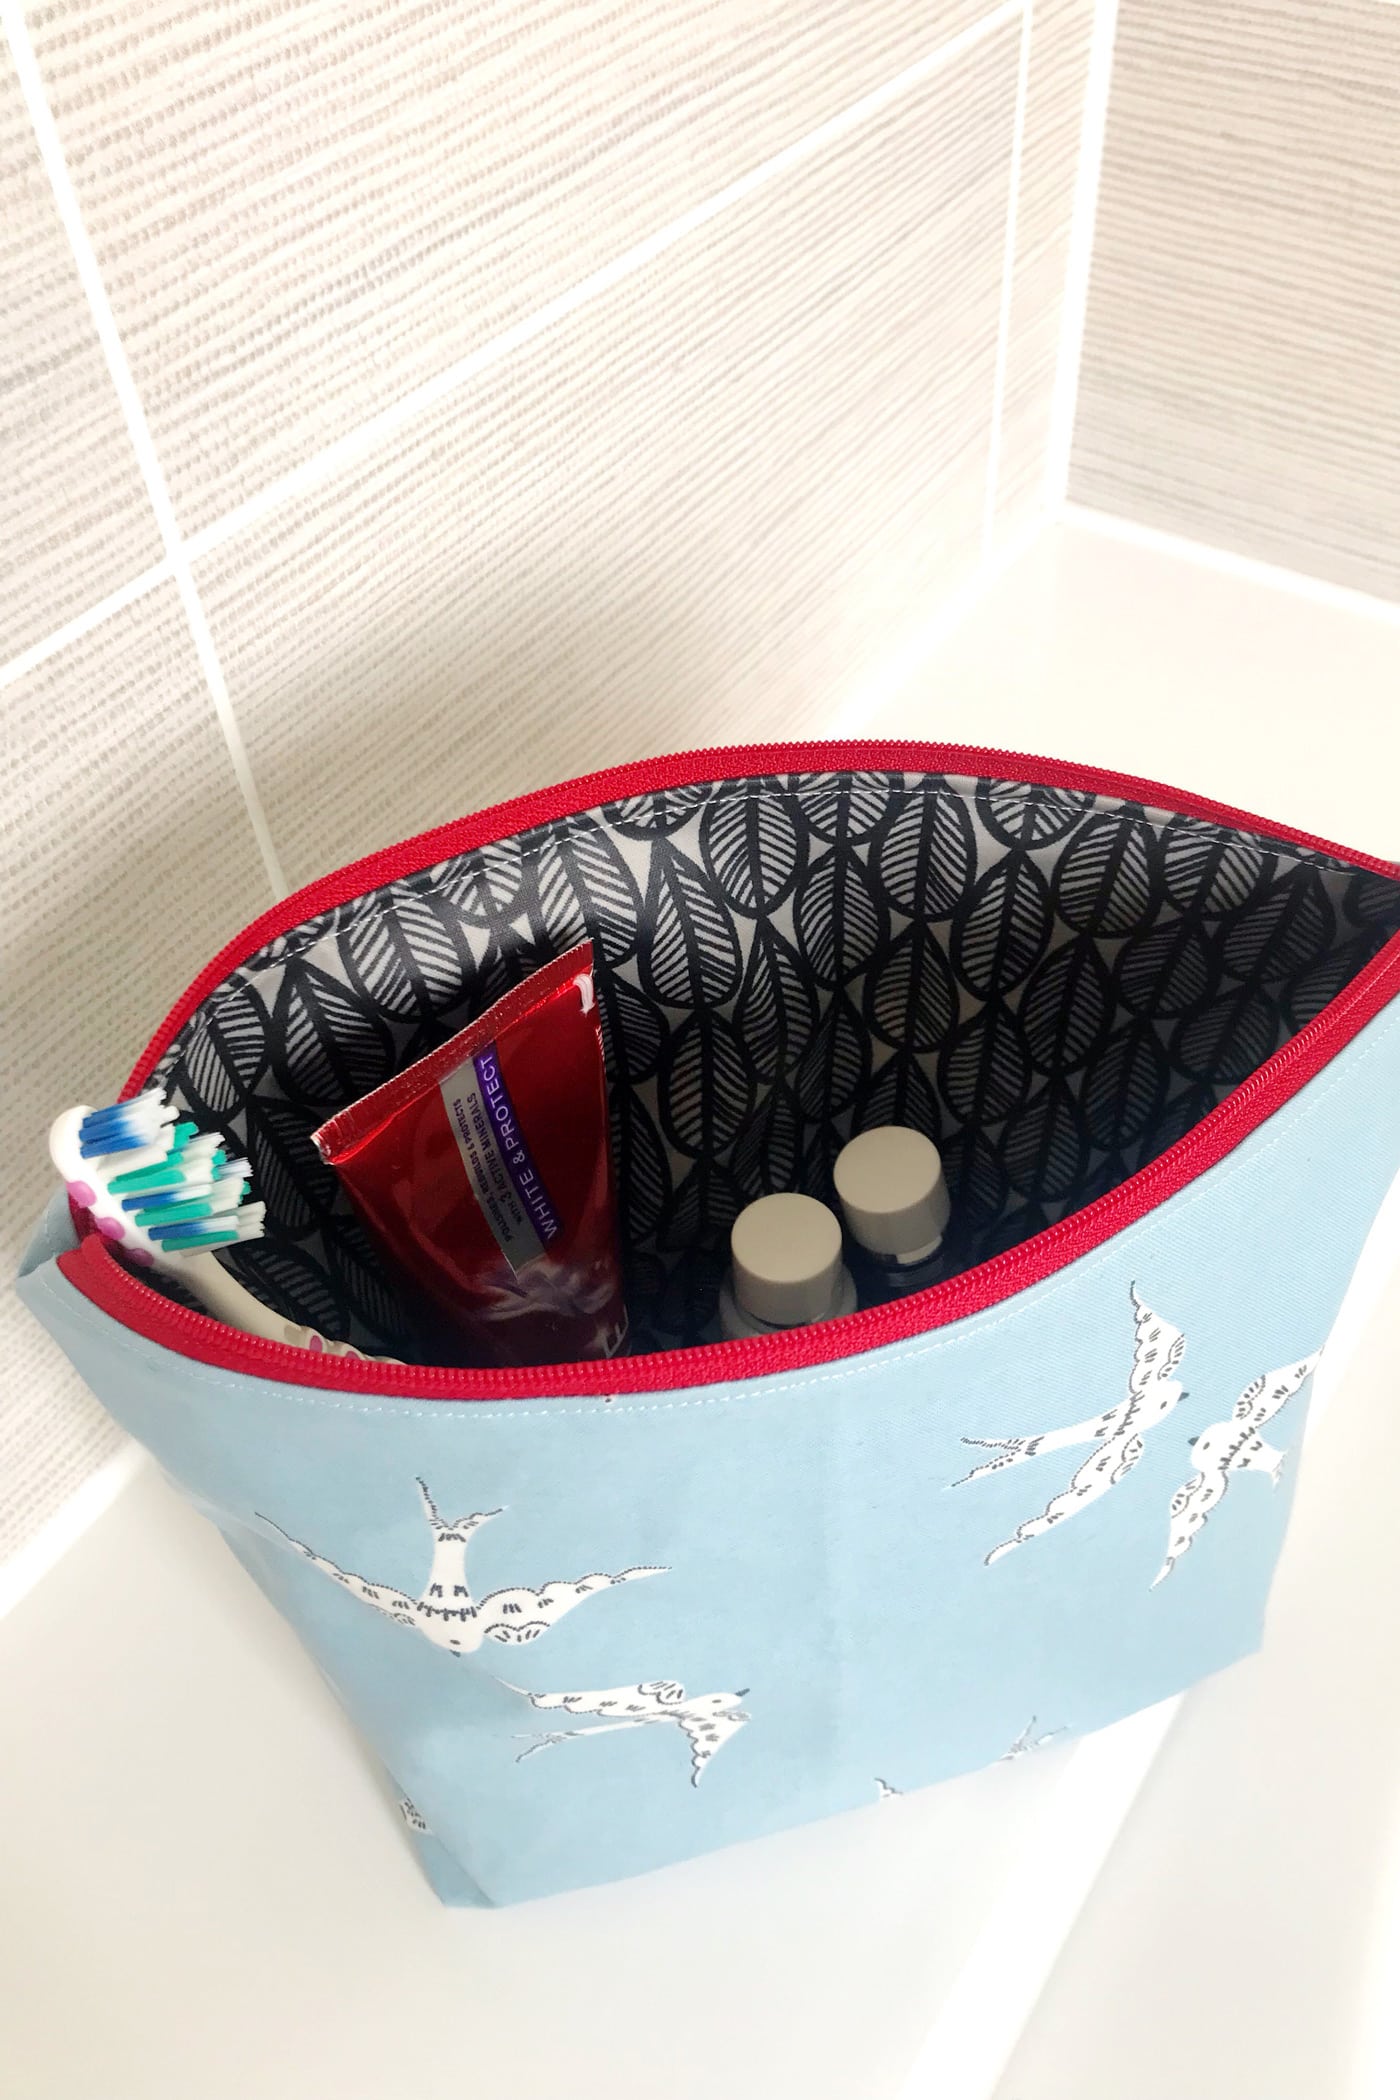 Inside of the laminated toiletry bag on bathroom counter